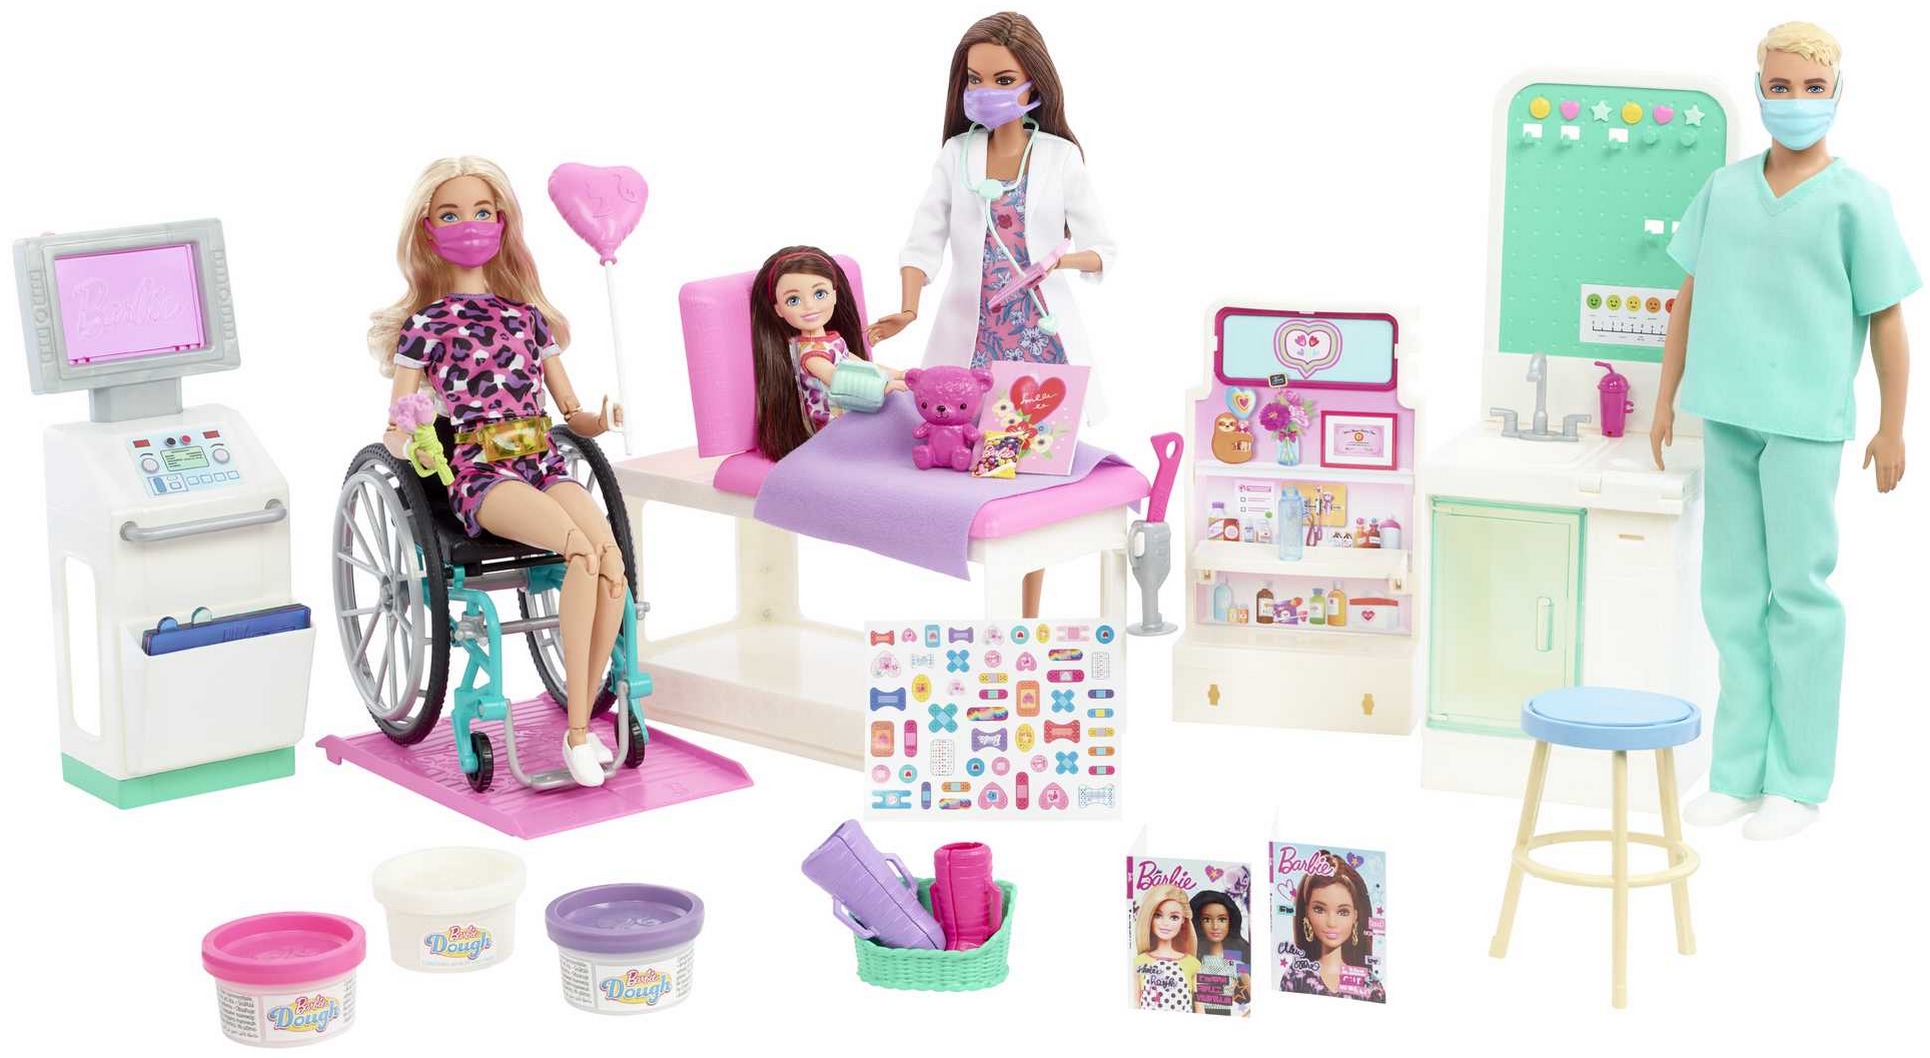 Barbie Care Facility playset with 4 dolls included - YouLoveIt.com